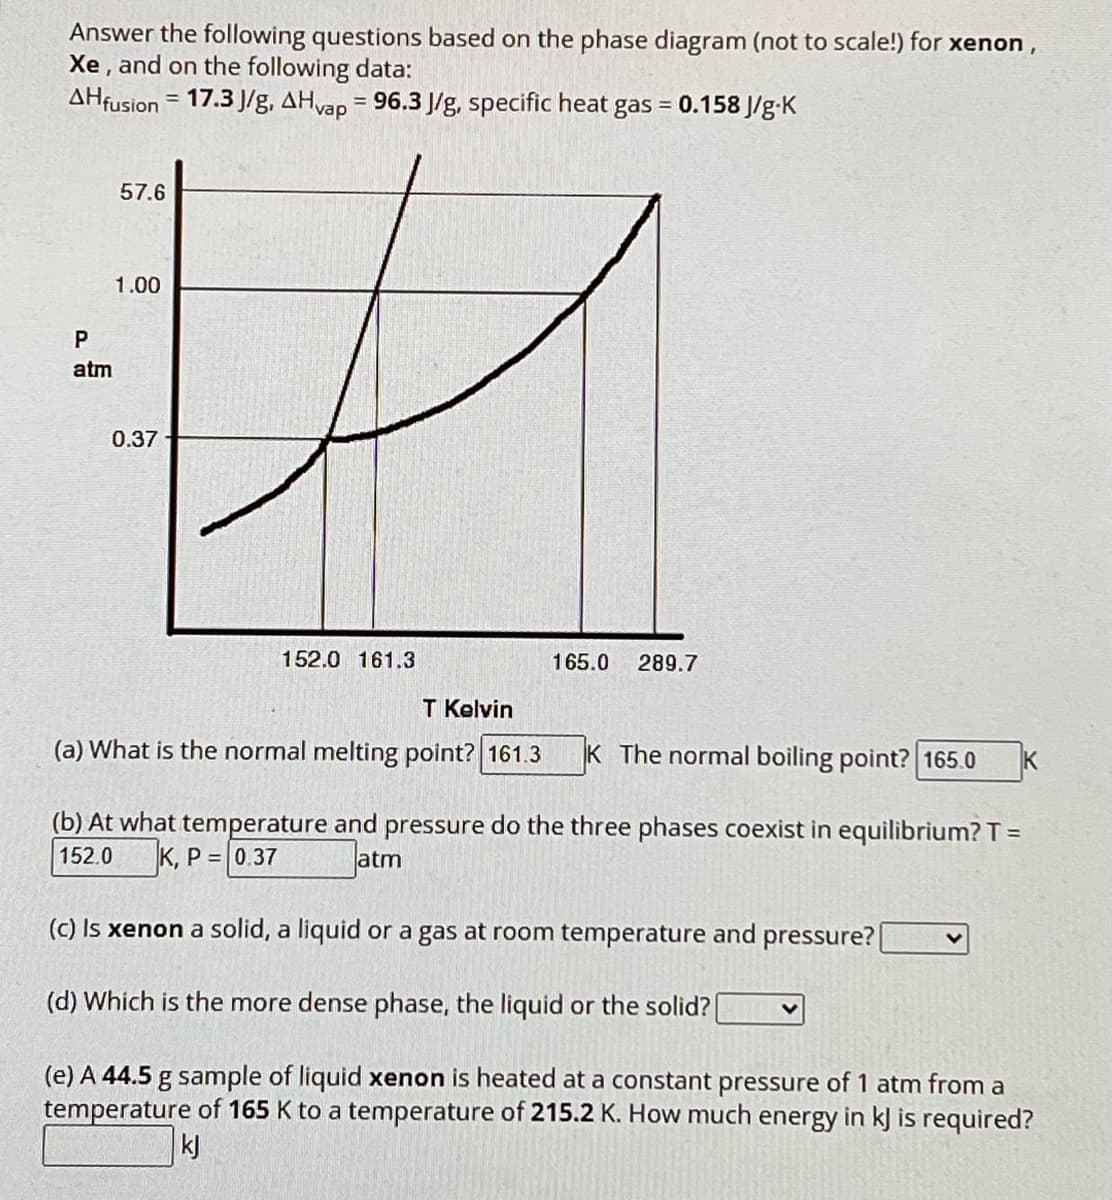 Answer the following questions based on the phase diagram (not to scale!) for xenon,
Xe, and on the following data:
=
AHfusion 17.3 J/g, AH vap = 96.3 J/g, specific heat gas = 0.158 J/g-K
57.6
P
1.00
atm
0.37
152.0 161.3
165.0 289.7
T Kelvin
(a) What is the normal melting point? 161.3
K The normal boiling point? 165.0
K
(b) At what temperature and pressure do the three phases coexist in equilibrium? T =
152.0
K, P=0.37
atm
(c) Is xenon a solid, a liquid or a gas at room temperature and pressure? [
(d) Which is the more dense phase, the liquid or the solid?|
(e) A 44.5 g sample of liquid xenon is heated at a constant pressure of 1 atm from a
temperature of 165 K to a temperature of 215.2 K. How much energy in kJ is required?
kj